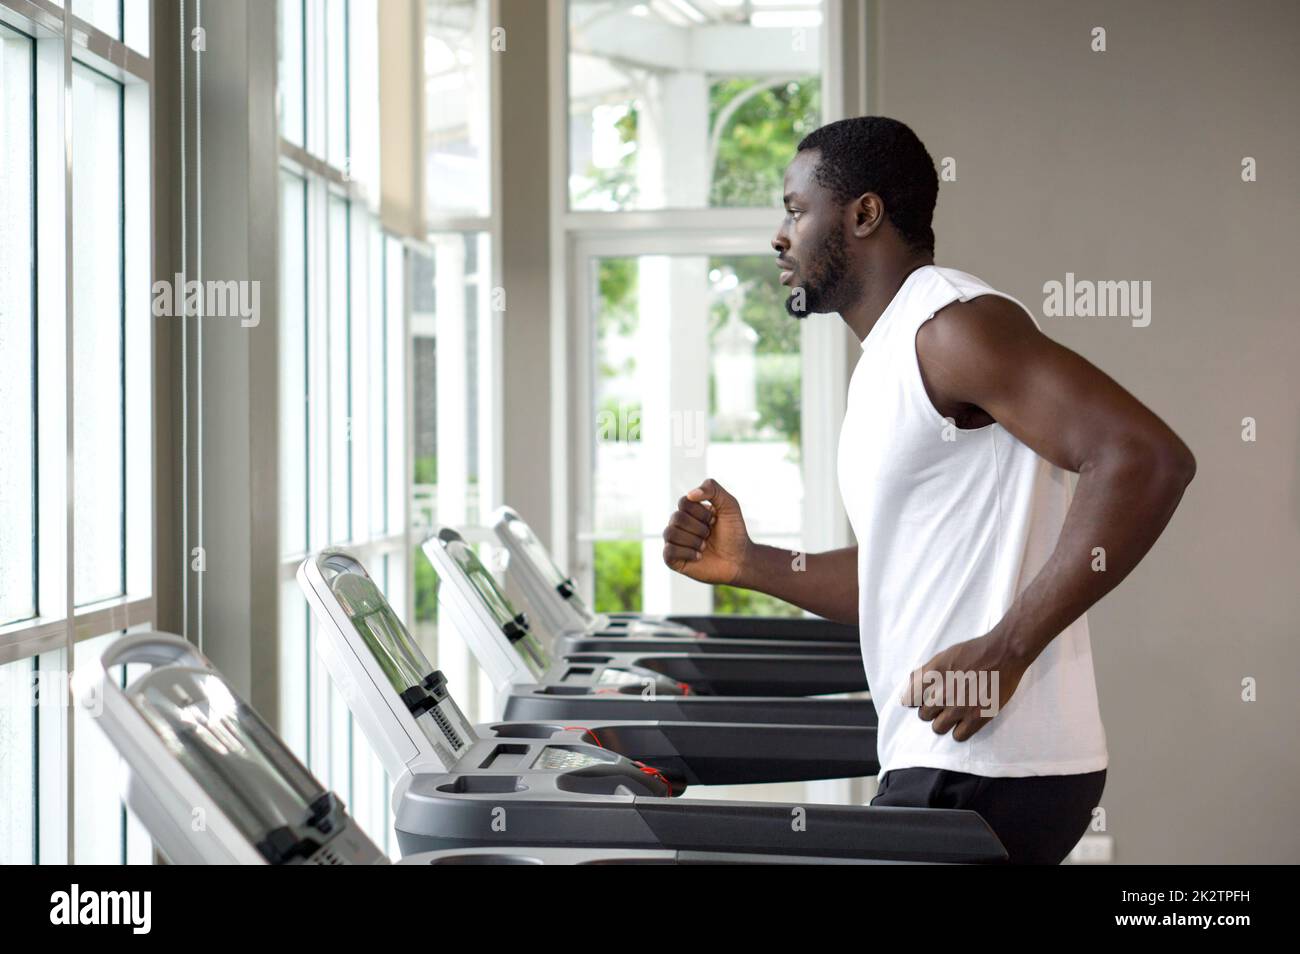 Young short curly black hair man with moustache and beard running on a treadmill in the gym, looking out of the window. Stock Photo